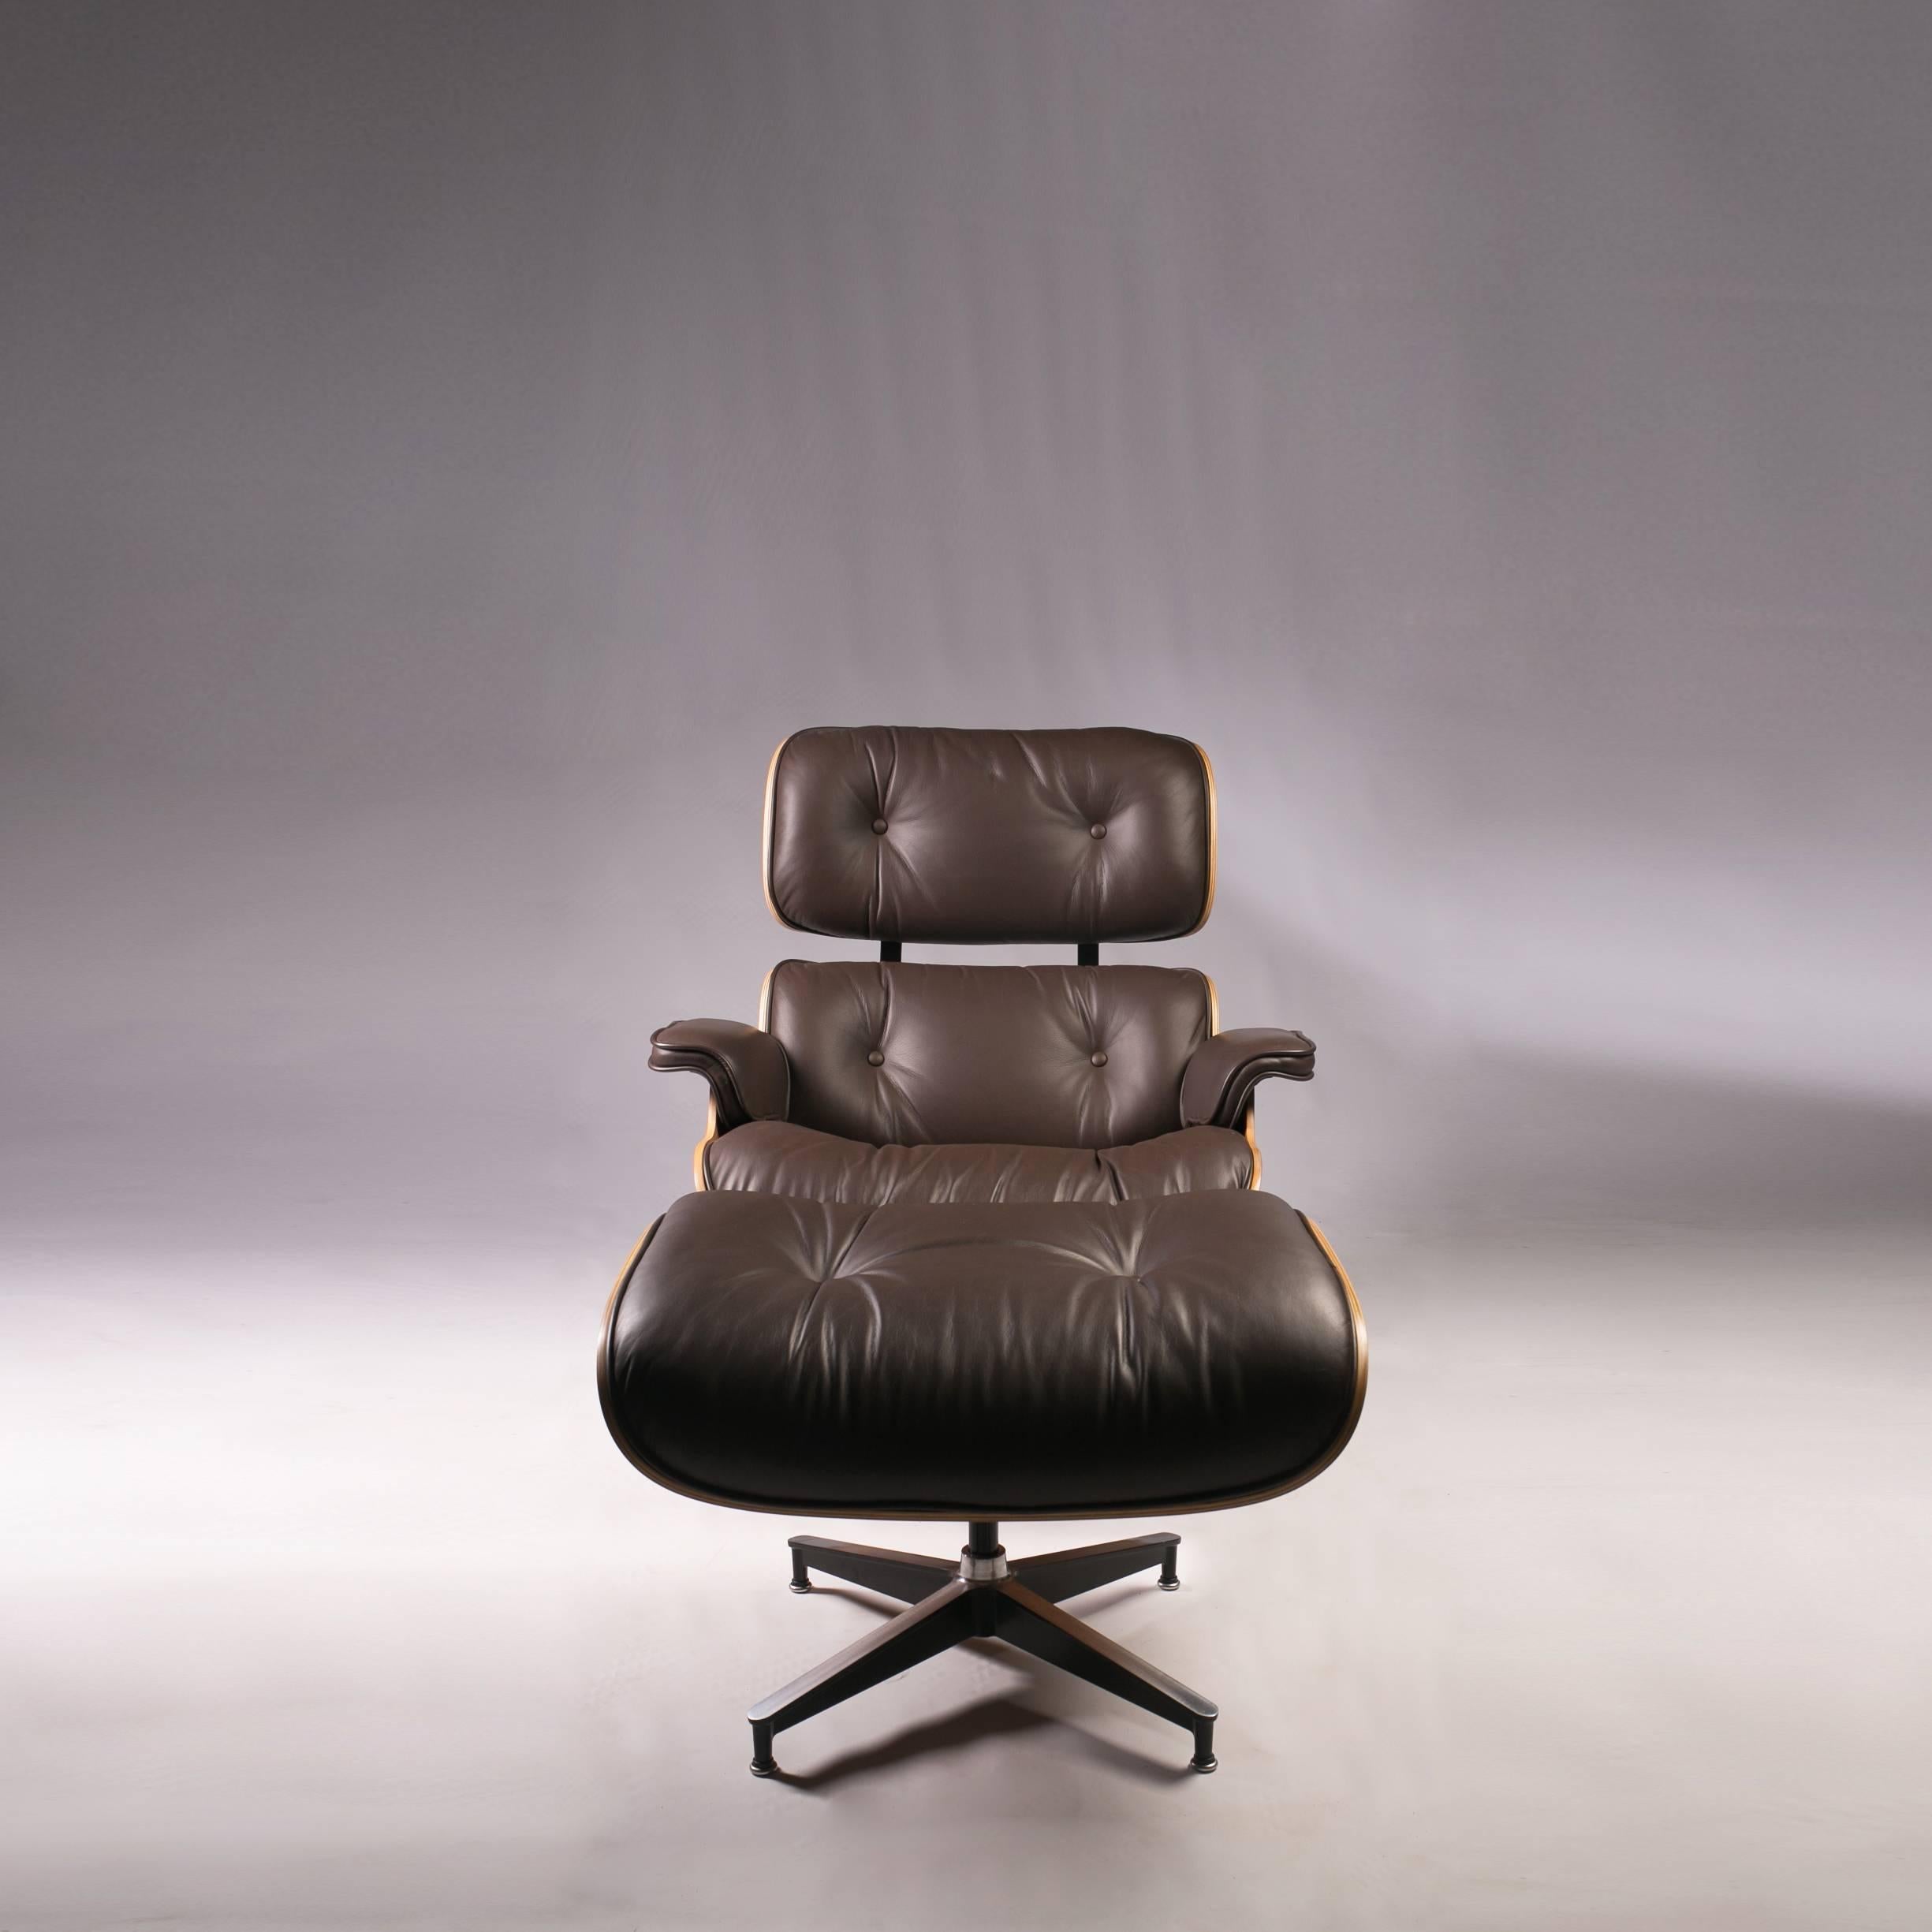 The Eames lounge chair and ottoman are fashioned together by use of molded plywood and leather. Released in 1956 after years of development, it was the  first chair that Eames designed for a high-end market. You can view examples of these furniture